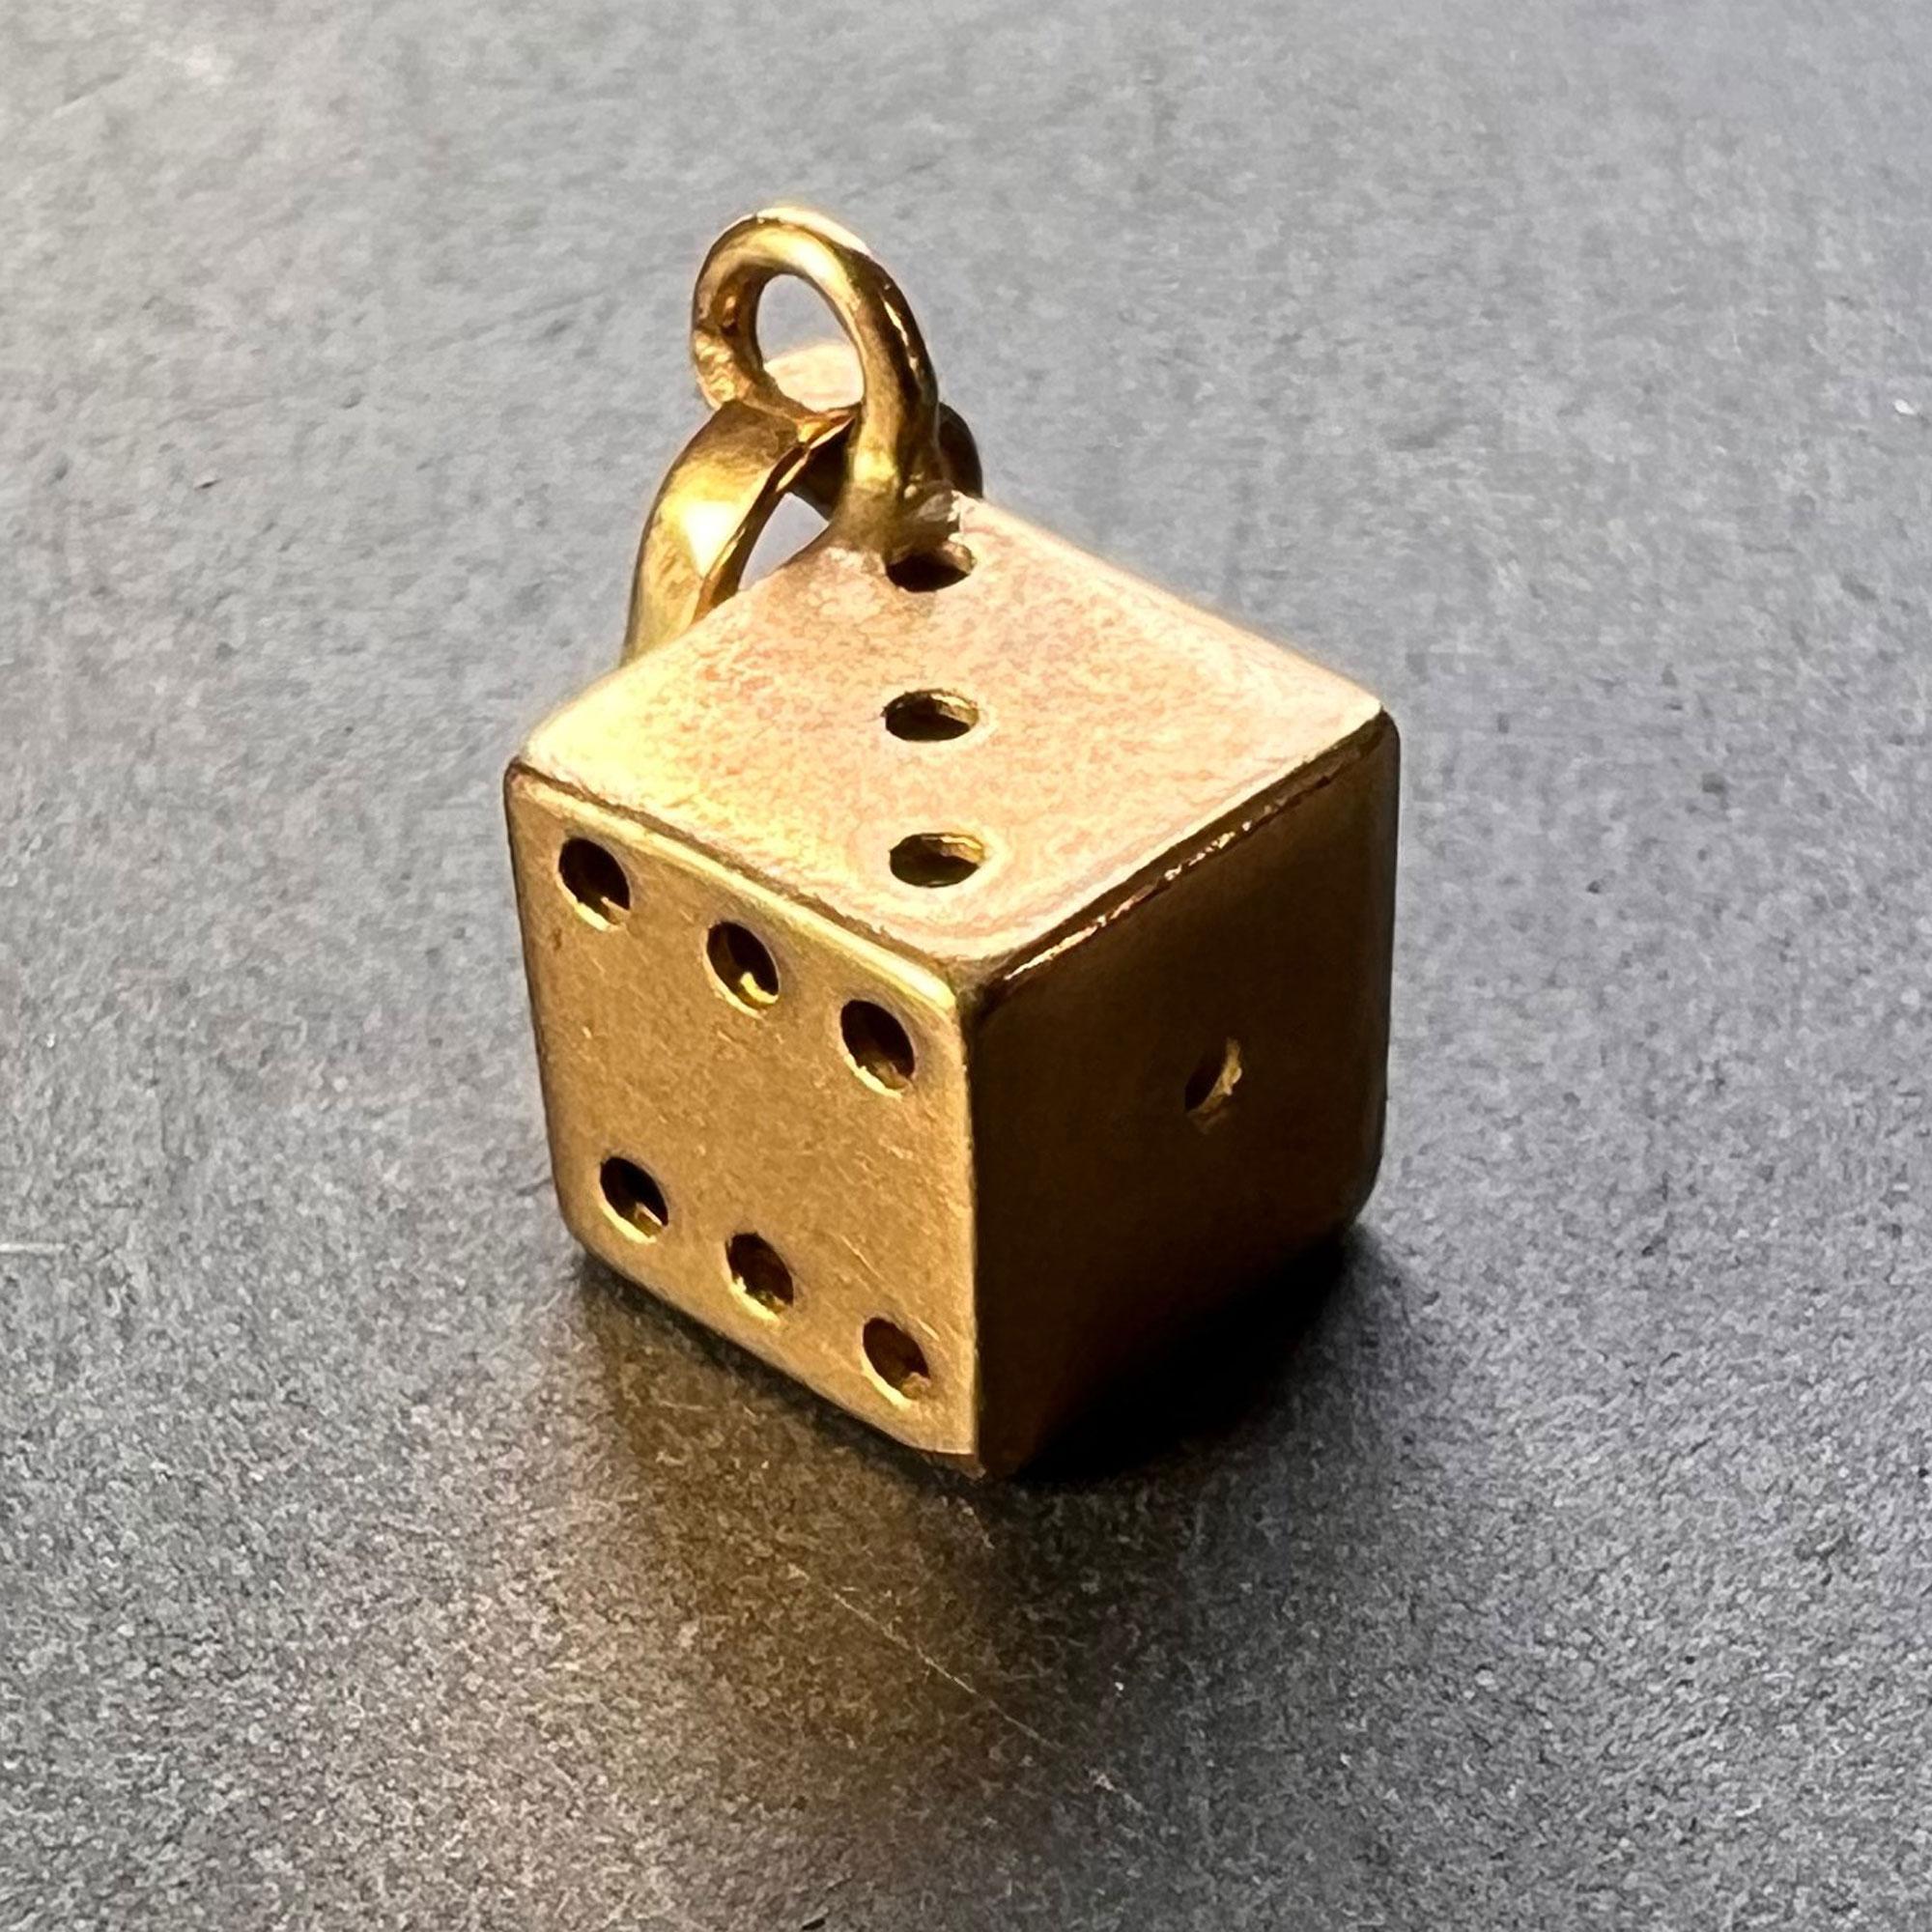 An 18 karat (18K) yellow gold charm pendant designed as a lucky dice with drilled pips. Stamped 750 for 18 karat gold with a French import mark for 18 karat gold.
 
Dimensions: 0.65 x 0.65 x 0.65 cm (not including jump ring)
Weight: 1.01